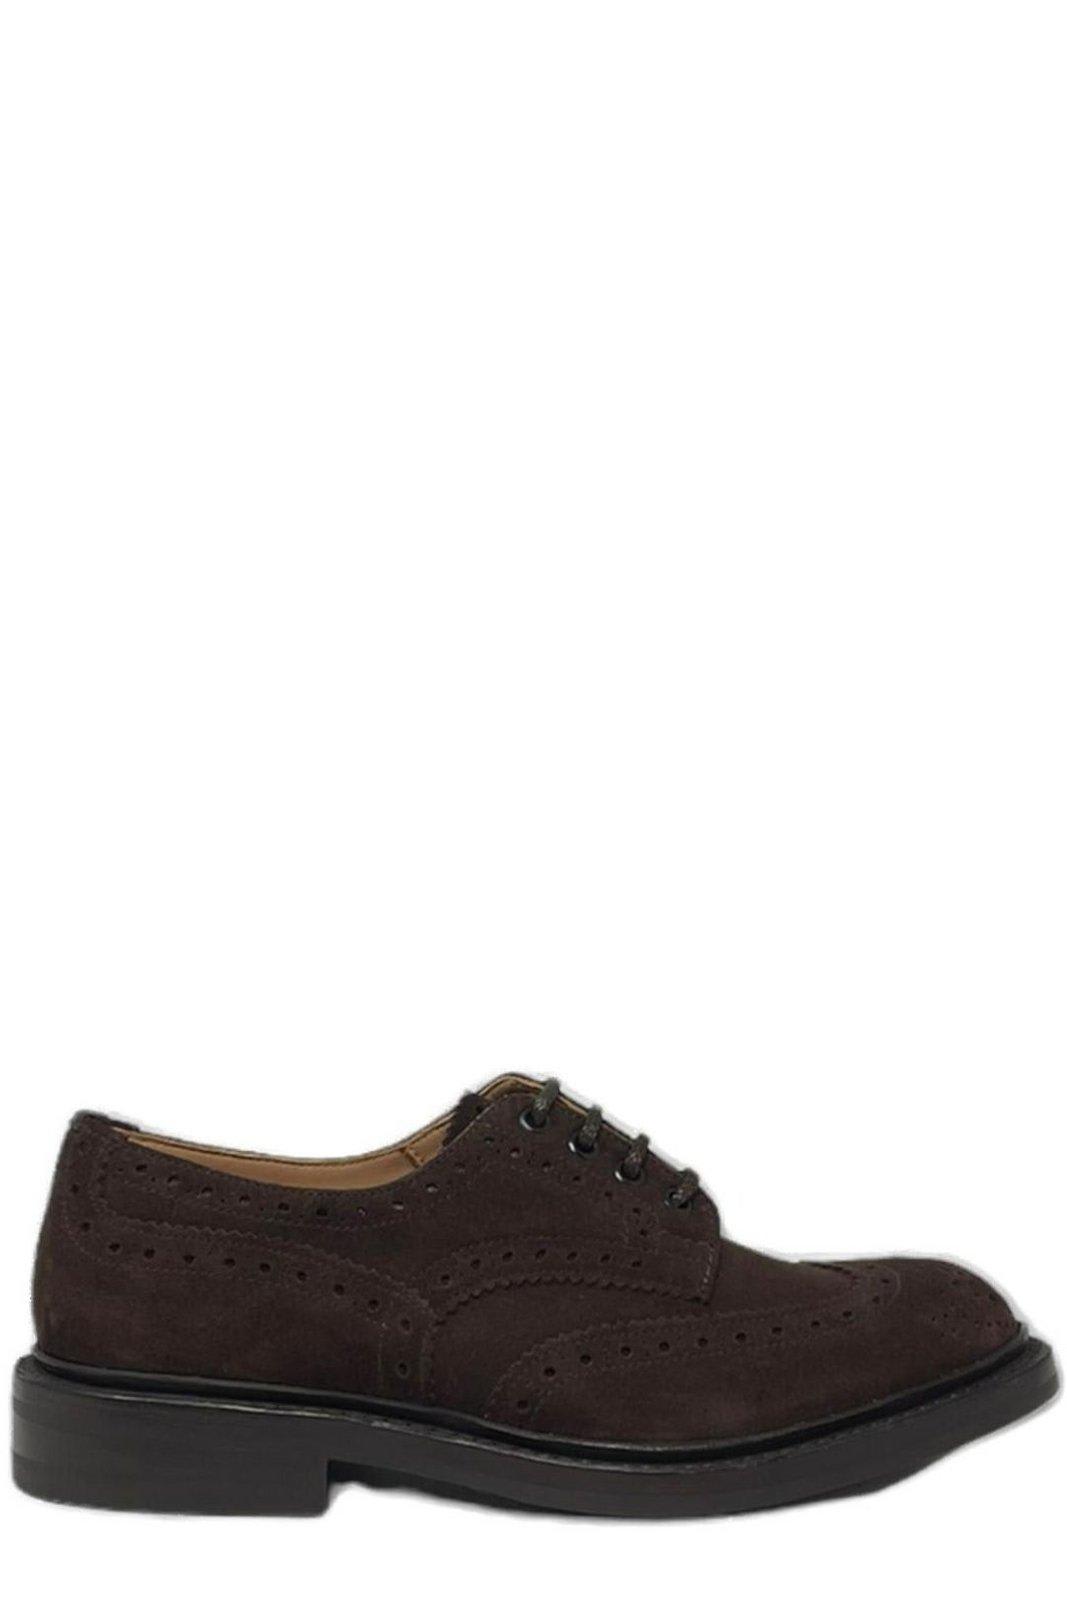 Bourton Brogue Lace-up Shoes Trickers